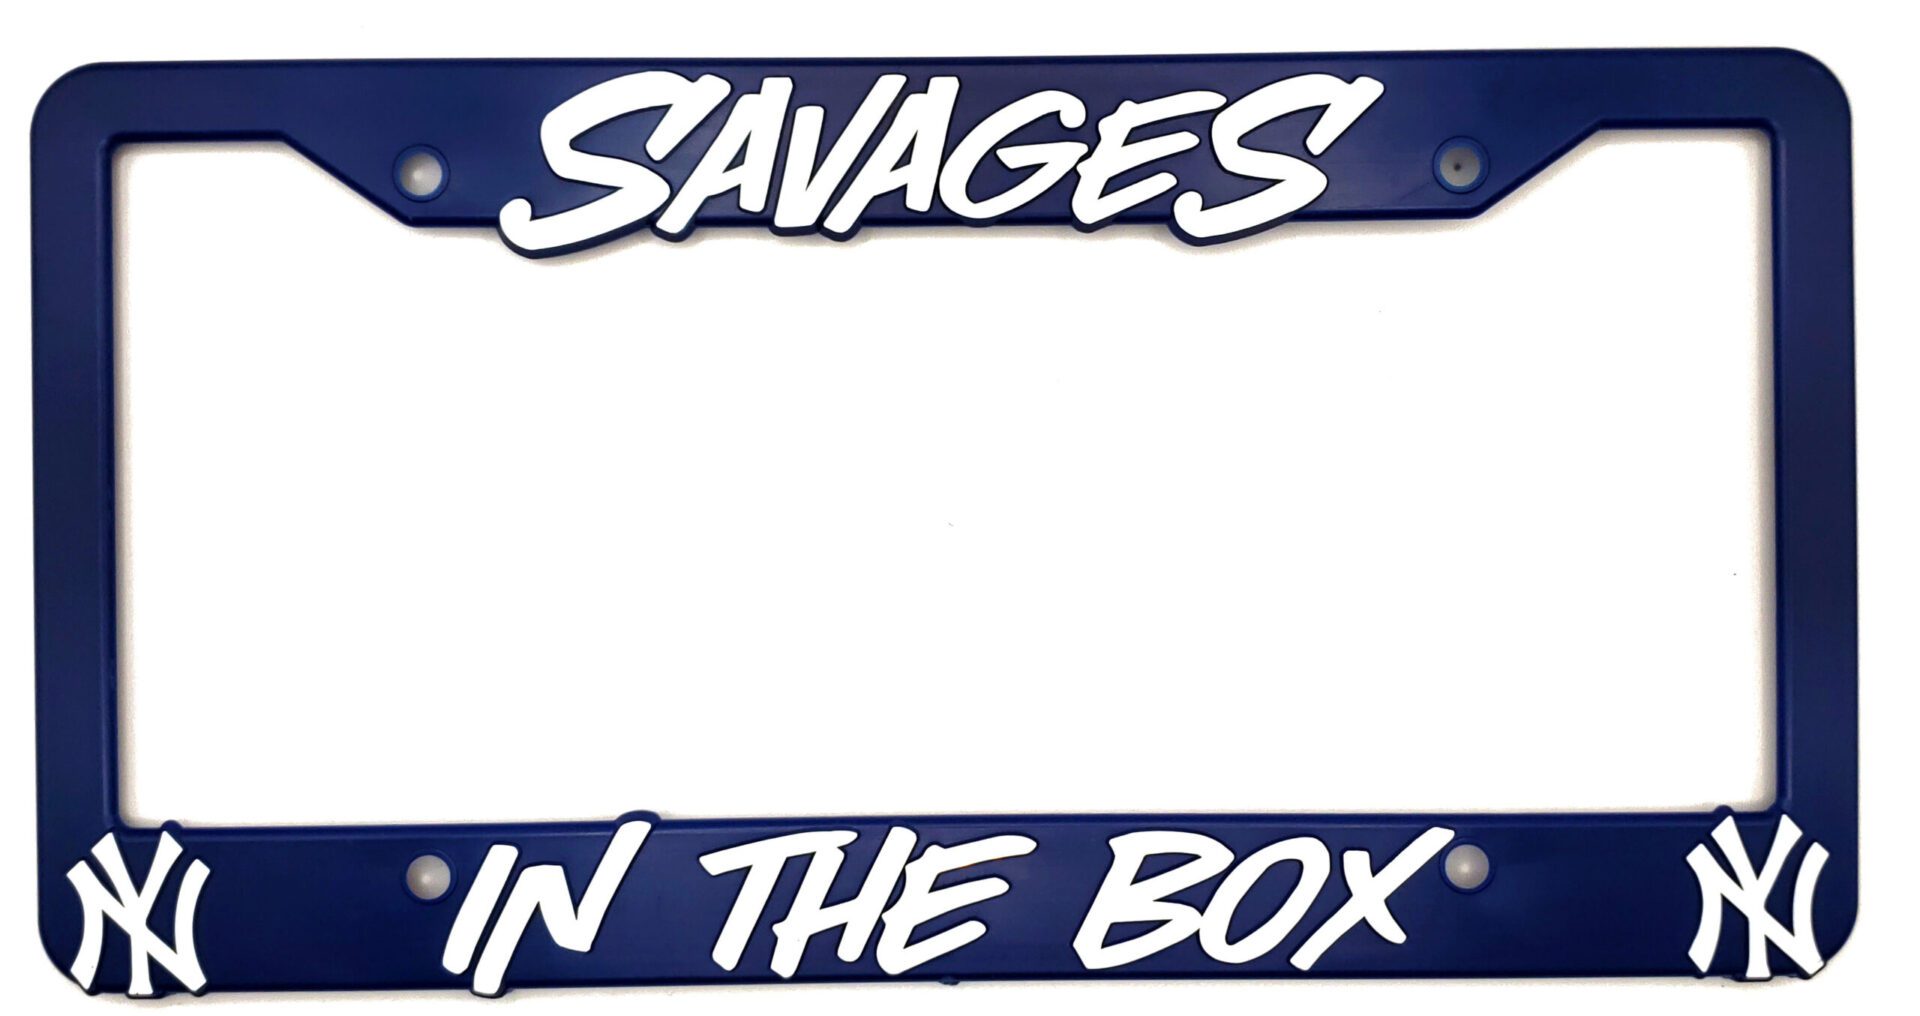 NY Yankees “Savages in the Box” License Plate Frame